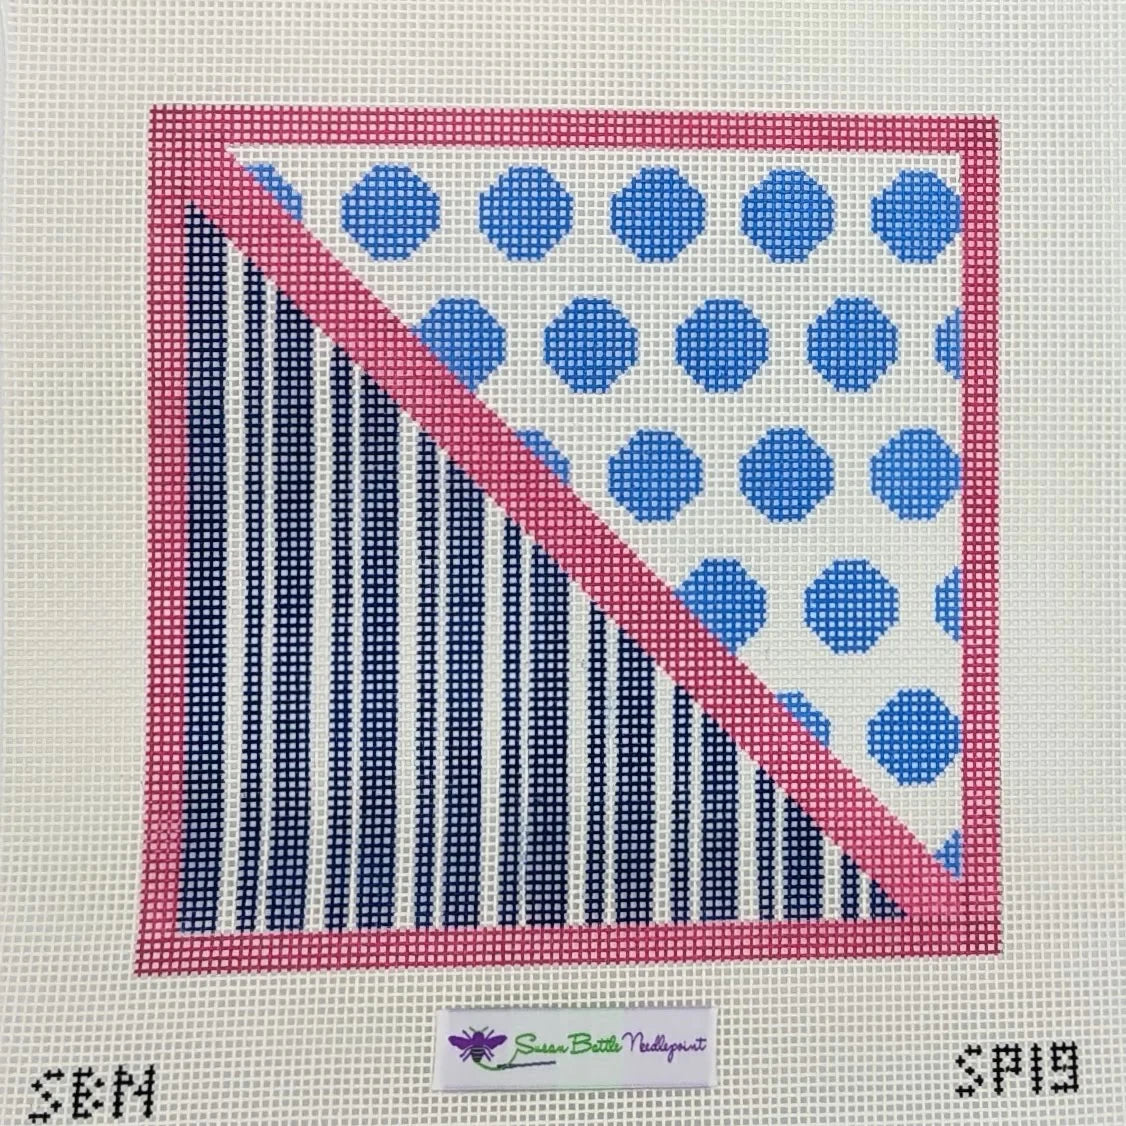 Susan Battle  SP19 10 mesh Blue Polka Dots and Stripes with Pink Geometric